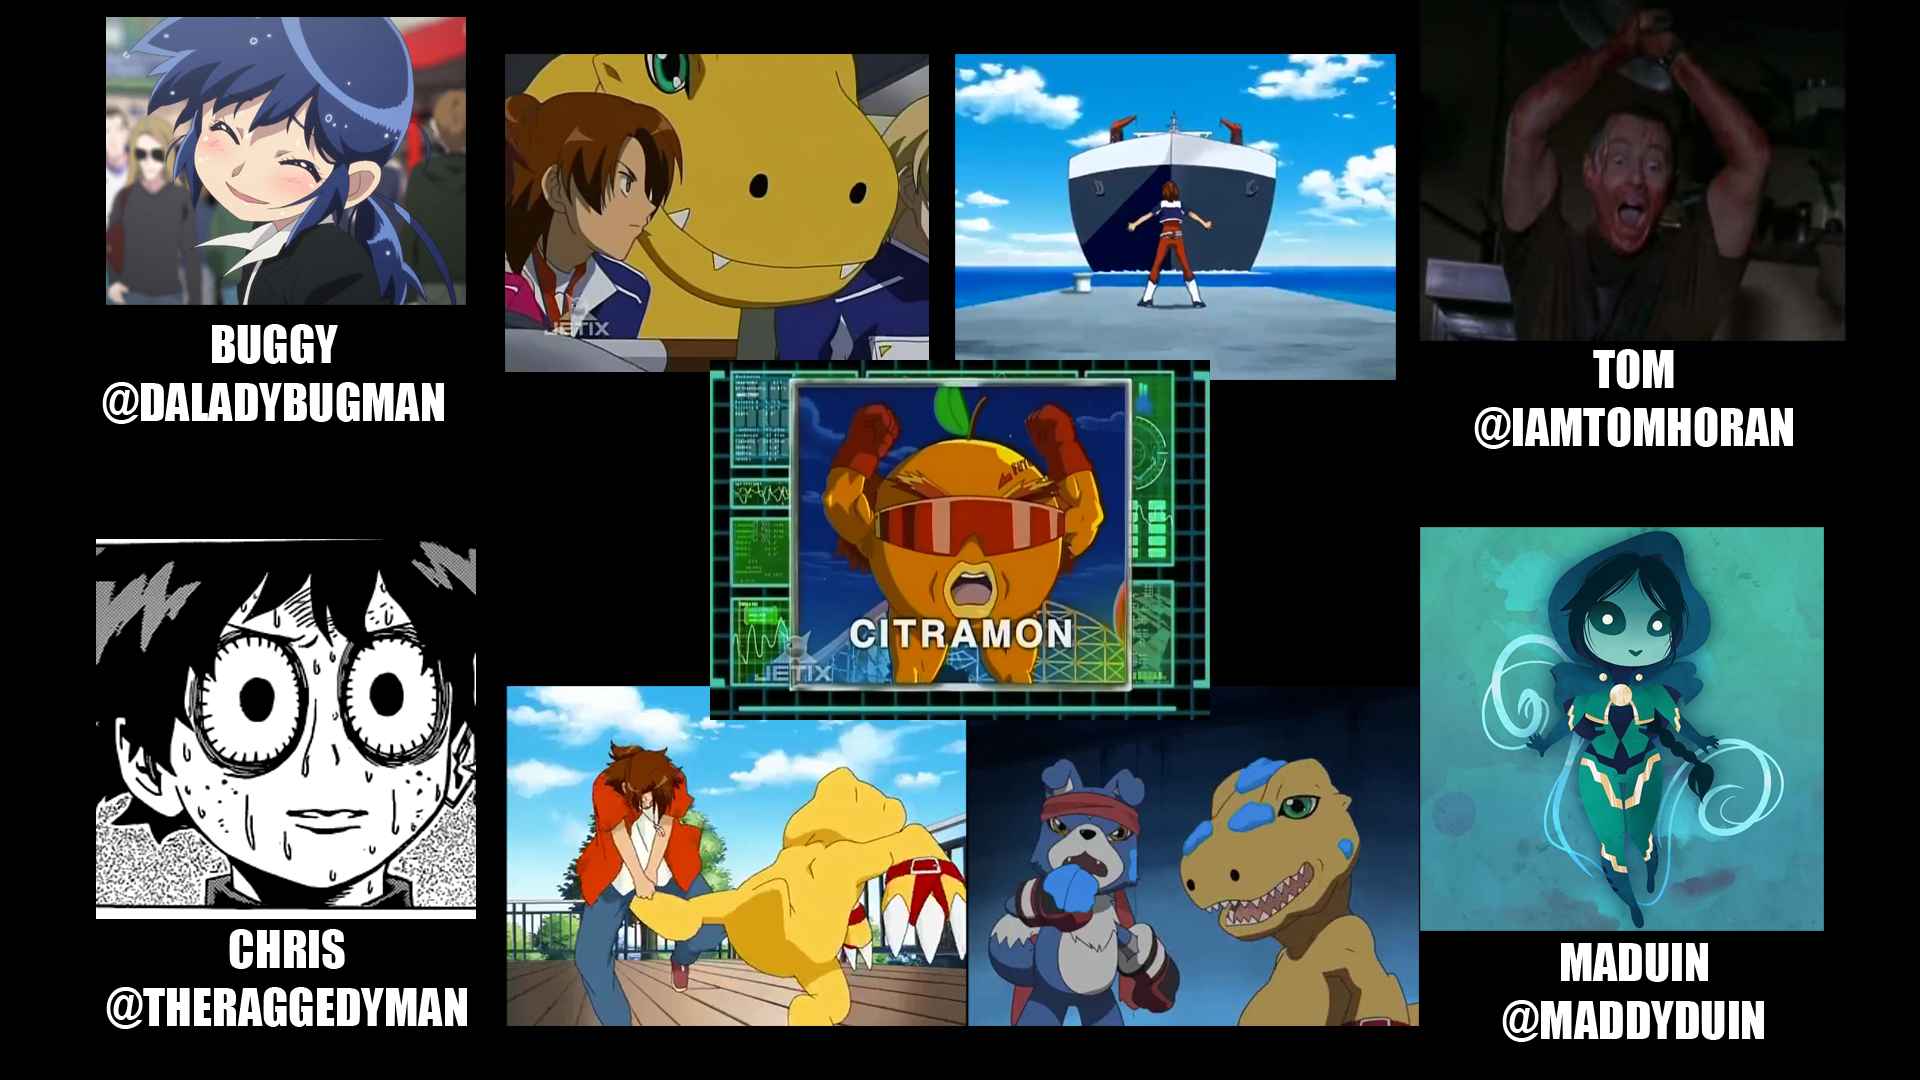 The Digicast 17: Jeff Fahey Did Not Die Or Voice Agumon